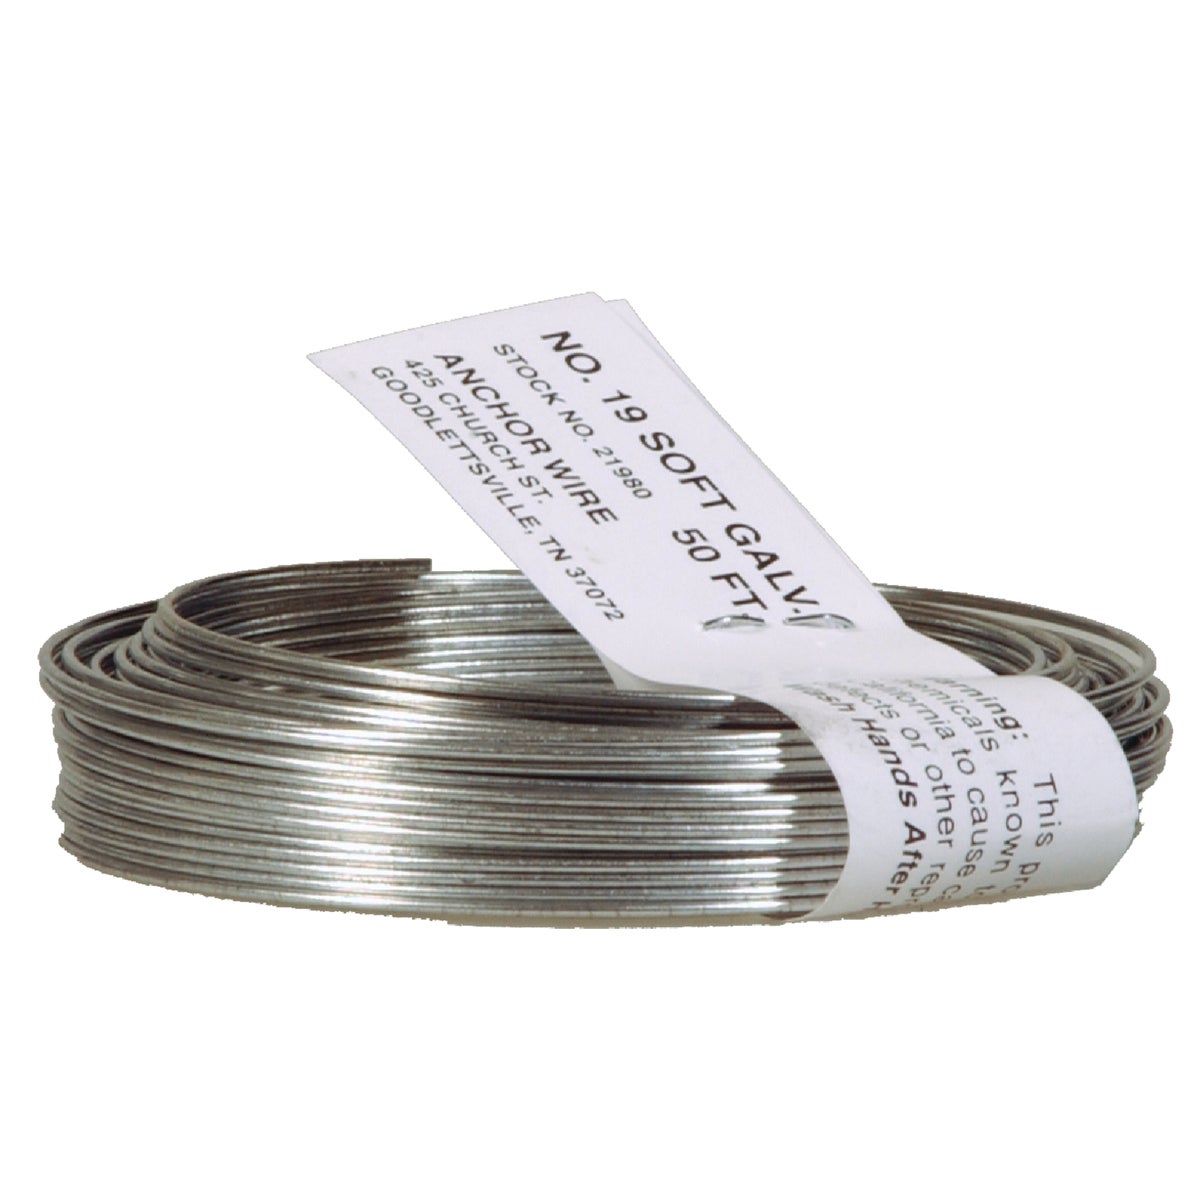 Item 429441, Mechanics and Stovepipe Wire. A general purpose line of wire. 50 Ft.